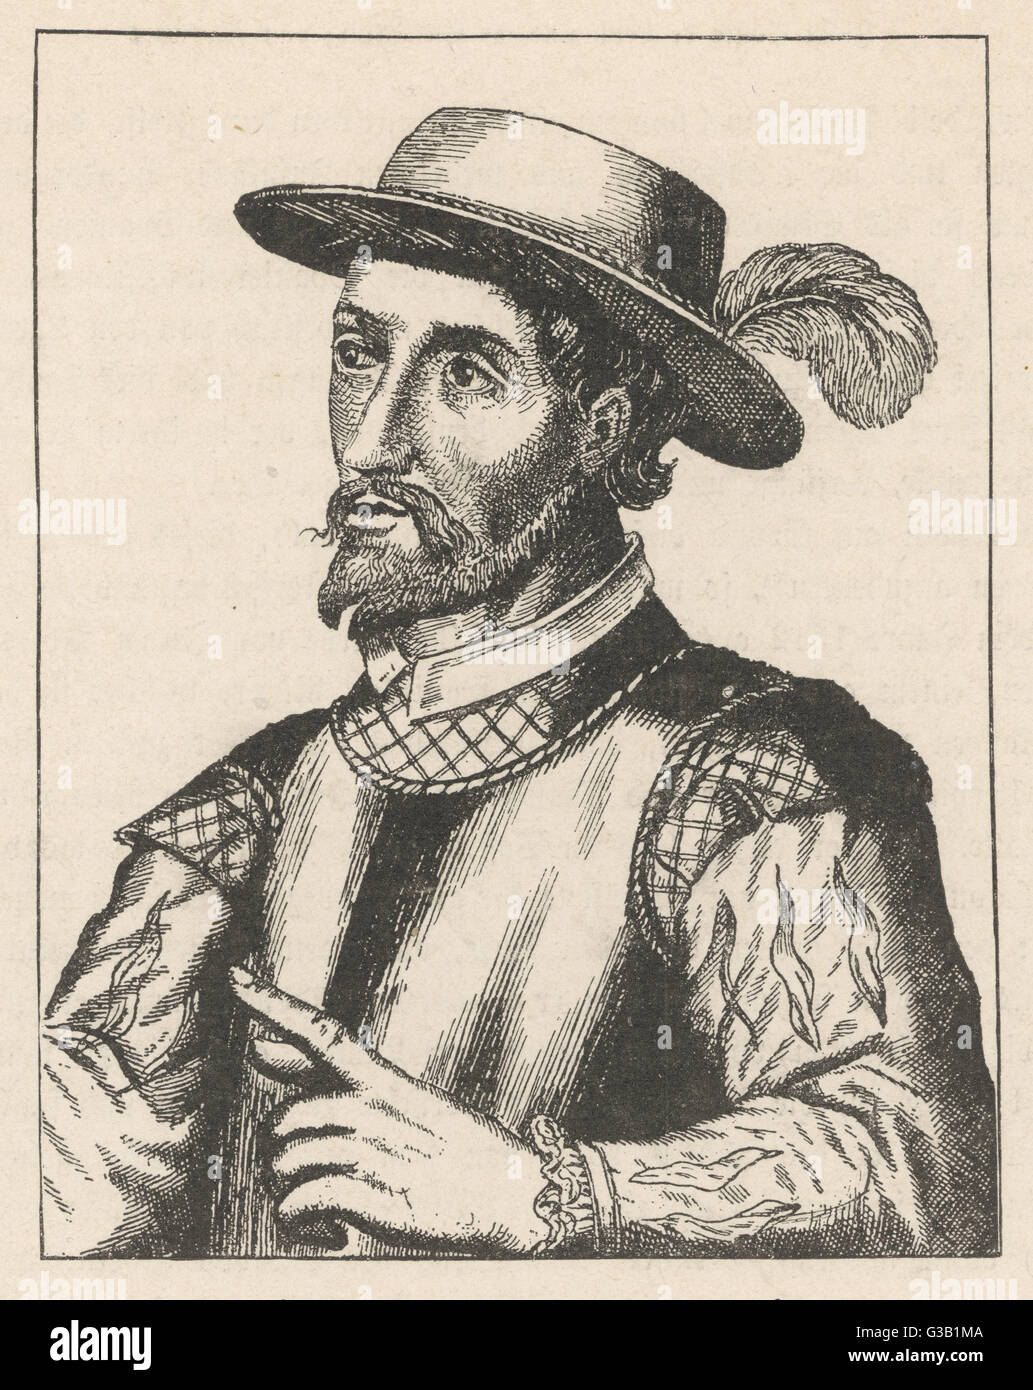 JUAN PONCE DE LEON  Spanish explorer. Went to  America with Columbus' second  voyage. Founded San Juan and   'discovered' Florida.     Date: 1460 - 1521 Stock Photo